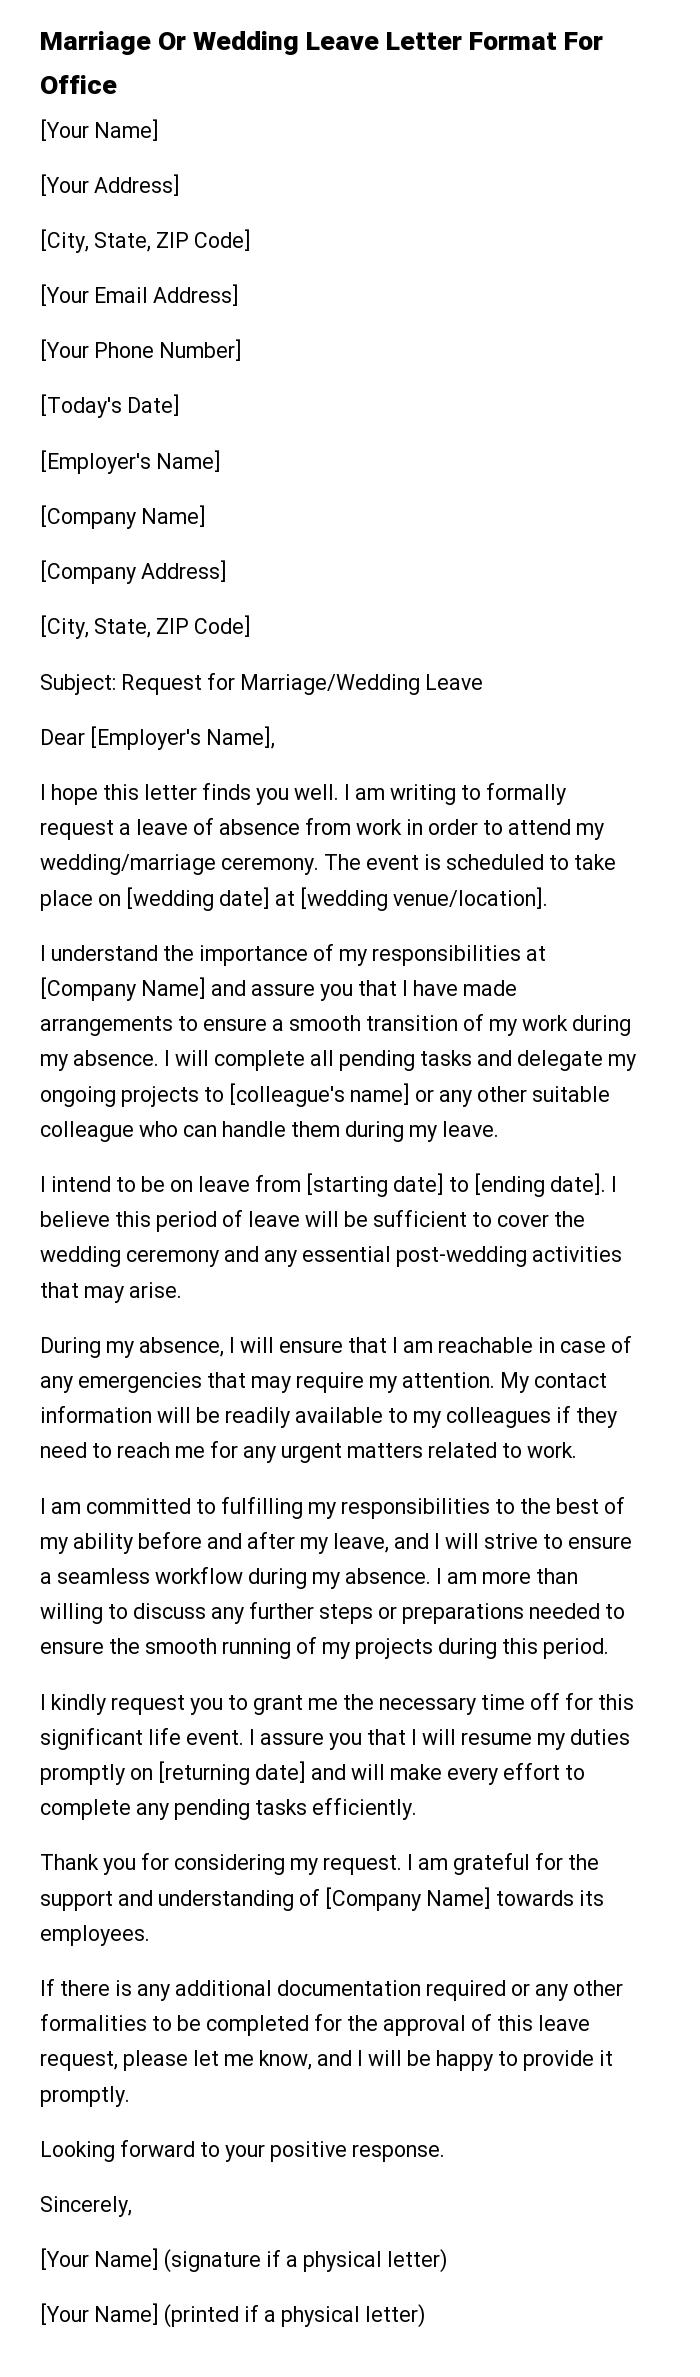 Marriage Or Wedding Leave Letter Format For Office